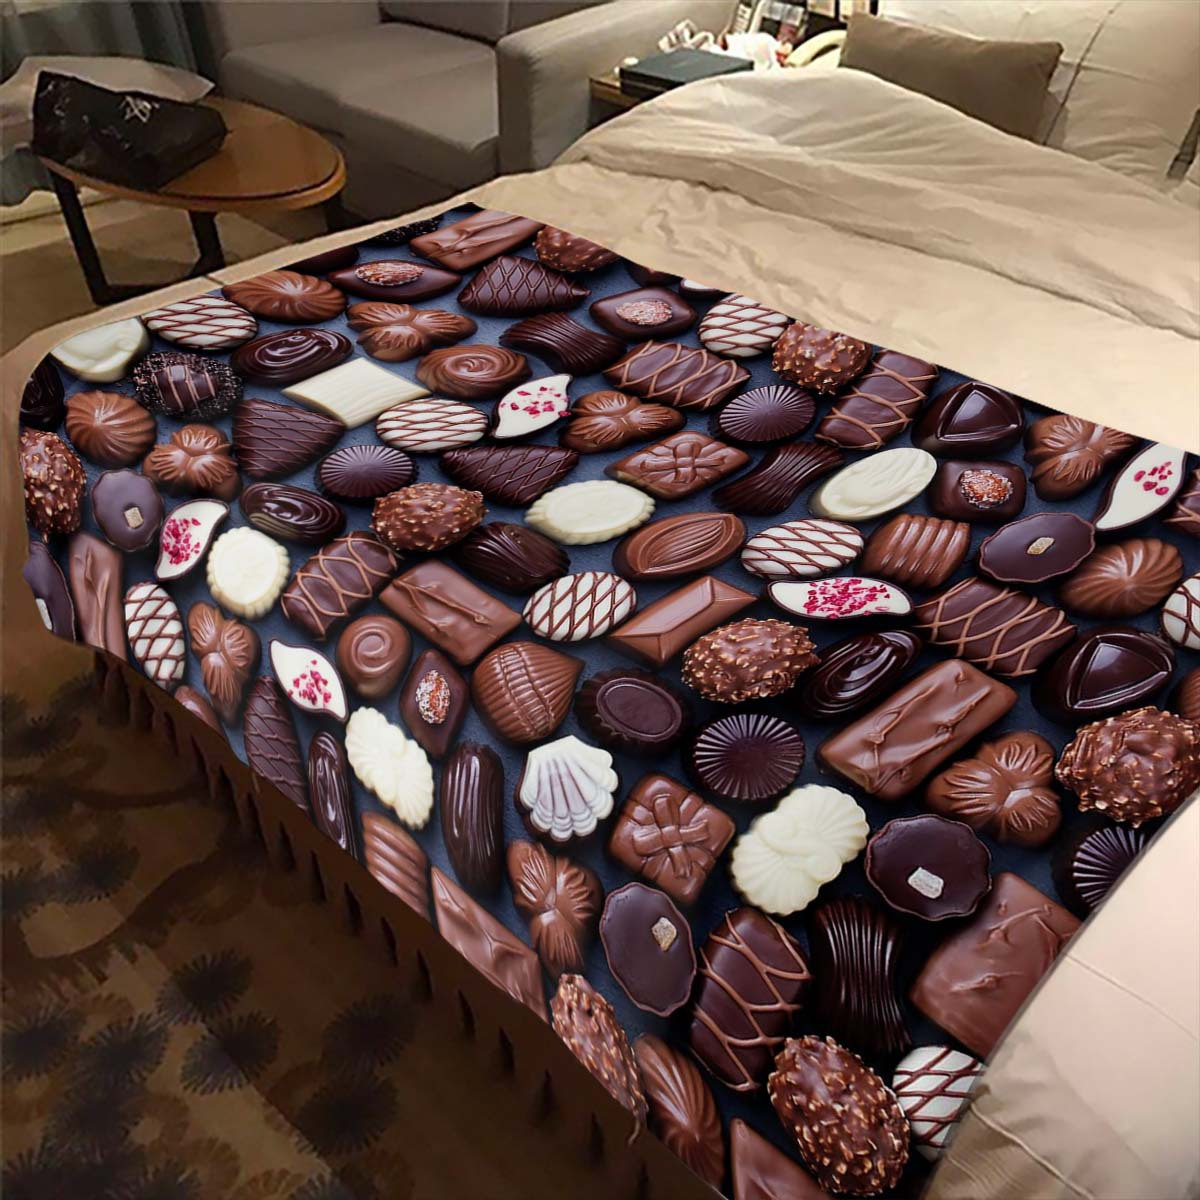 

Velvet Blanket With Chocolate 3d Patterns For All Seasons Office Chair